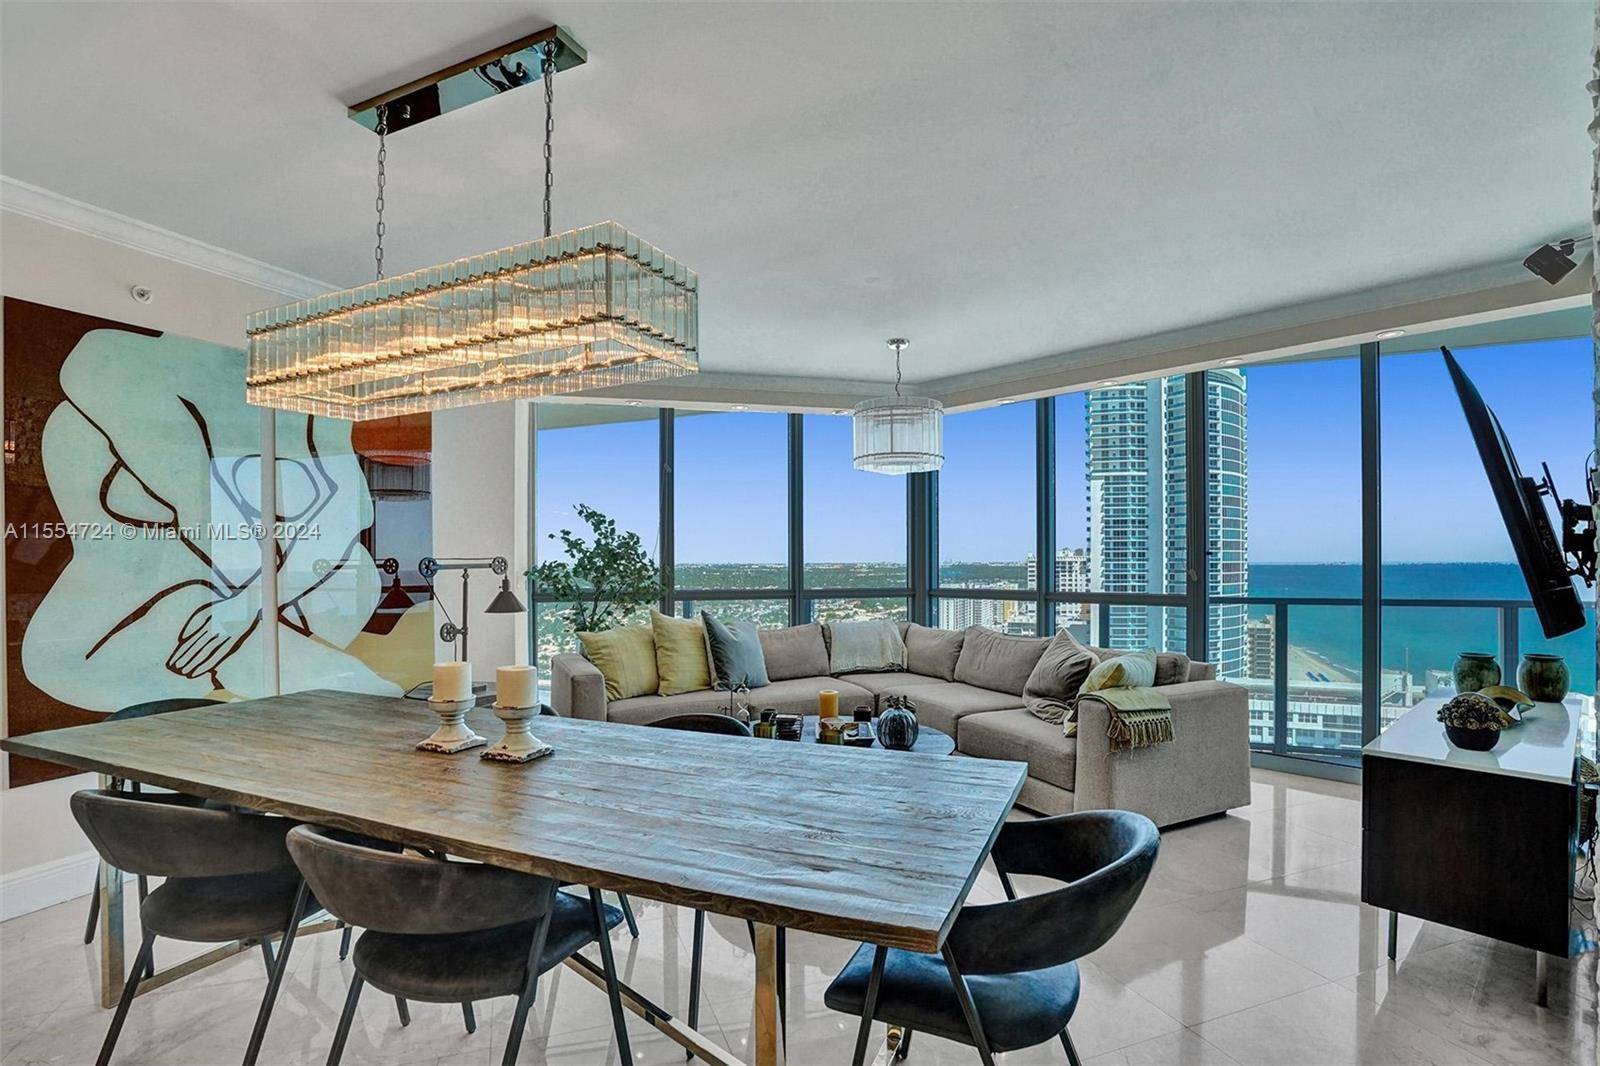 Discover luxury living at its finest in this exquisite high rise condo apartment located in the prestigious Ocean Palms building in Hollywood.